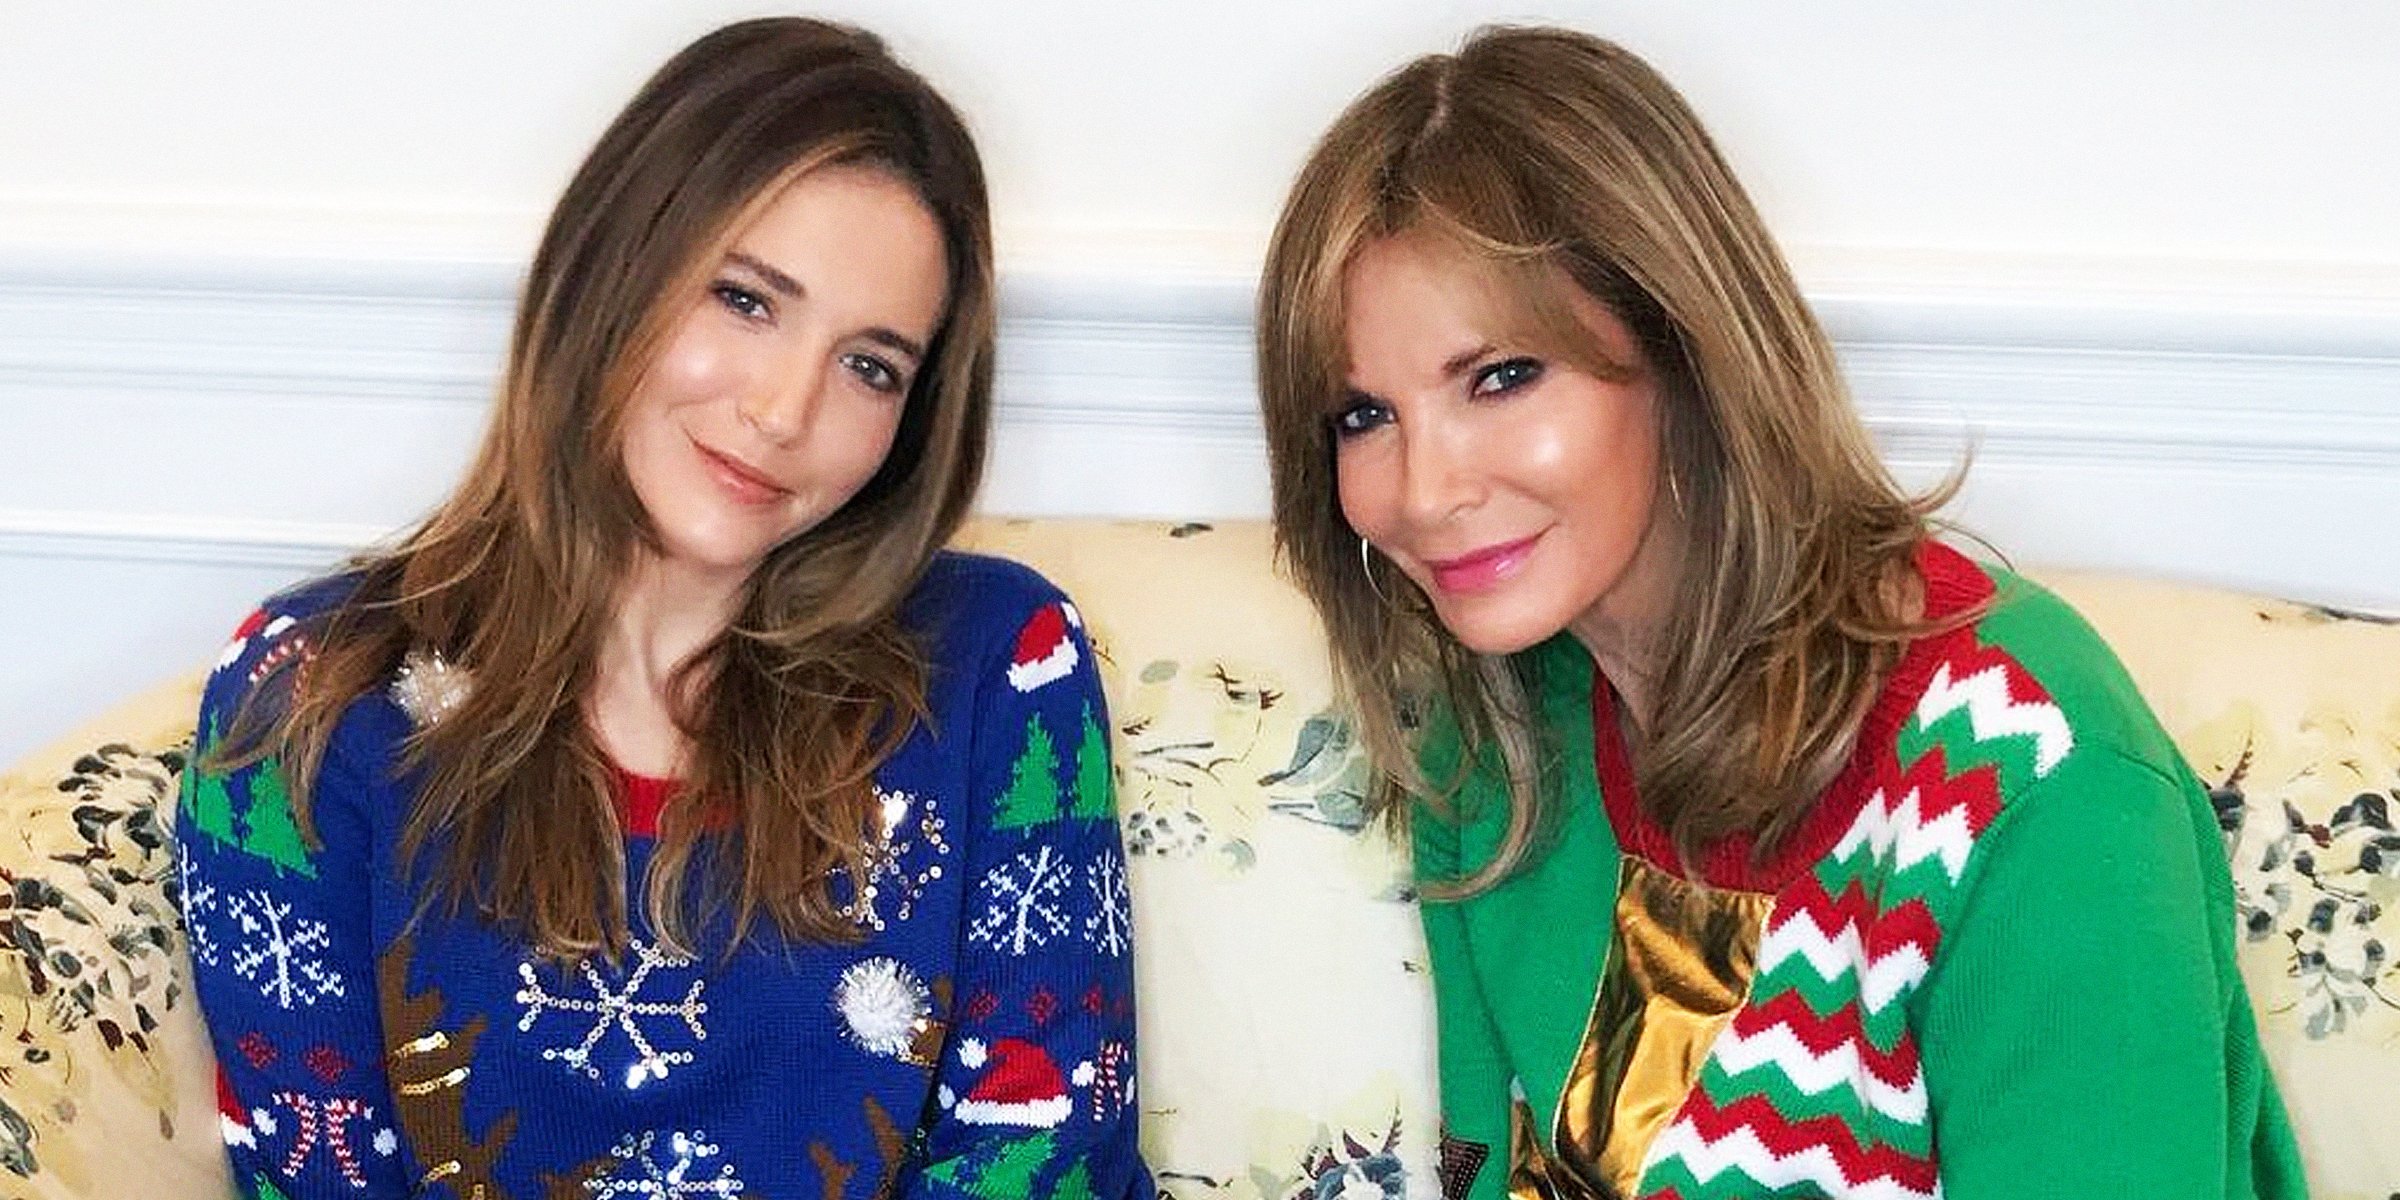 Spencer Margaret Richmond and Jaclyn Smith | Source: Instagram.com/realjaclynsmith